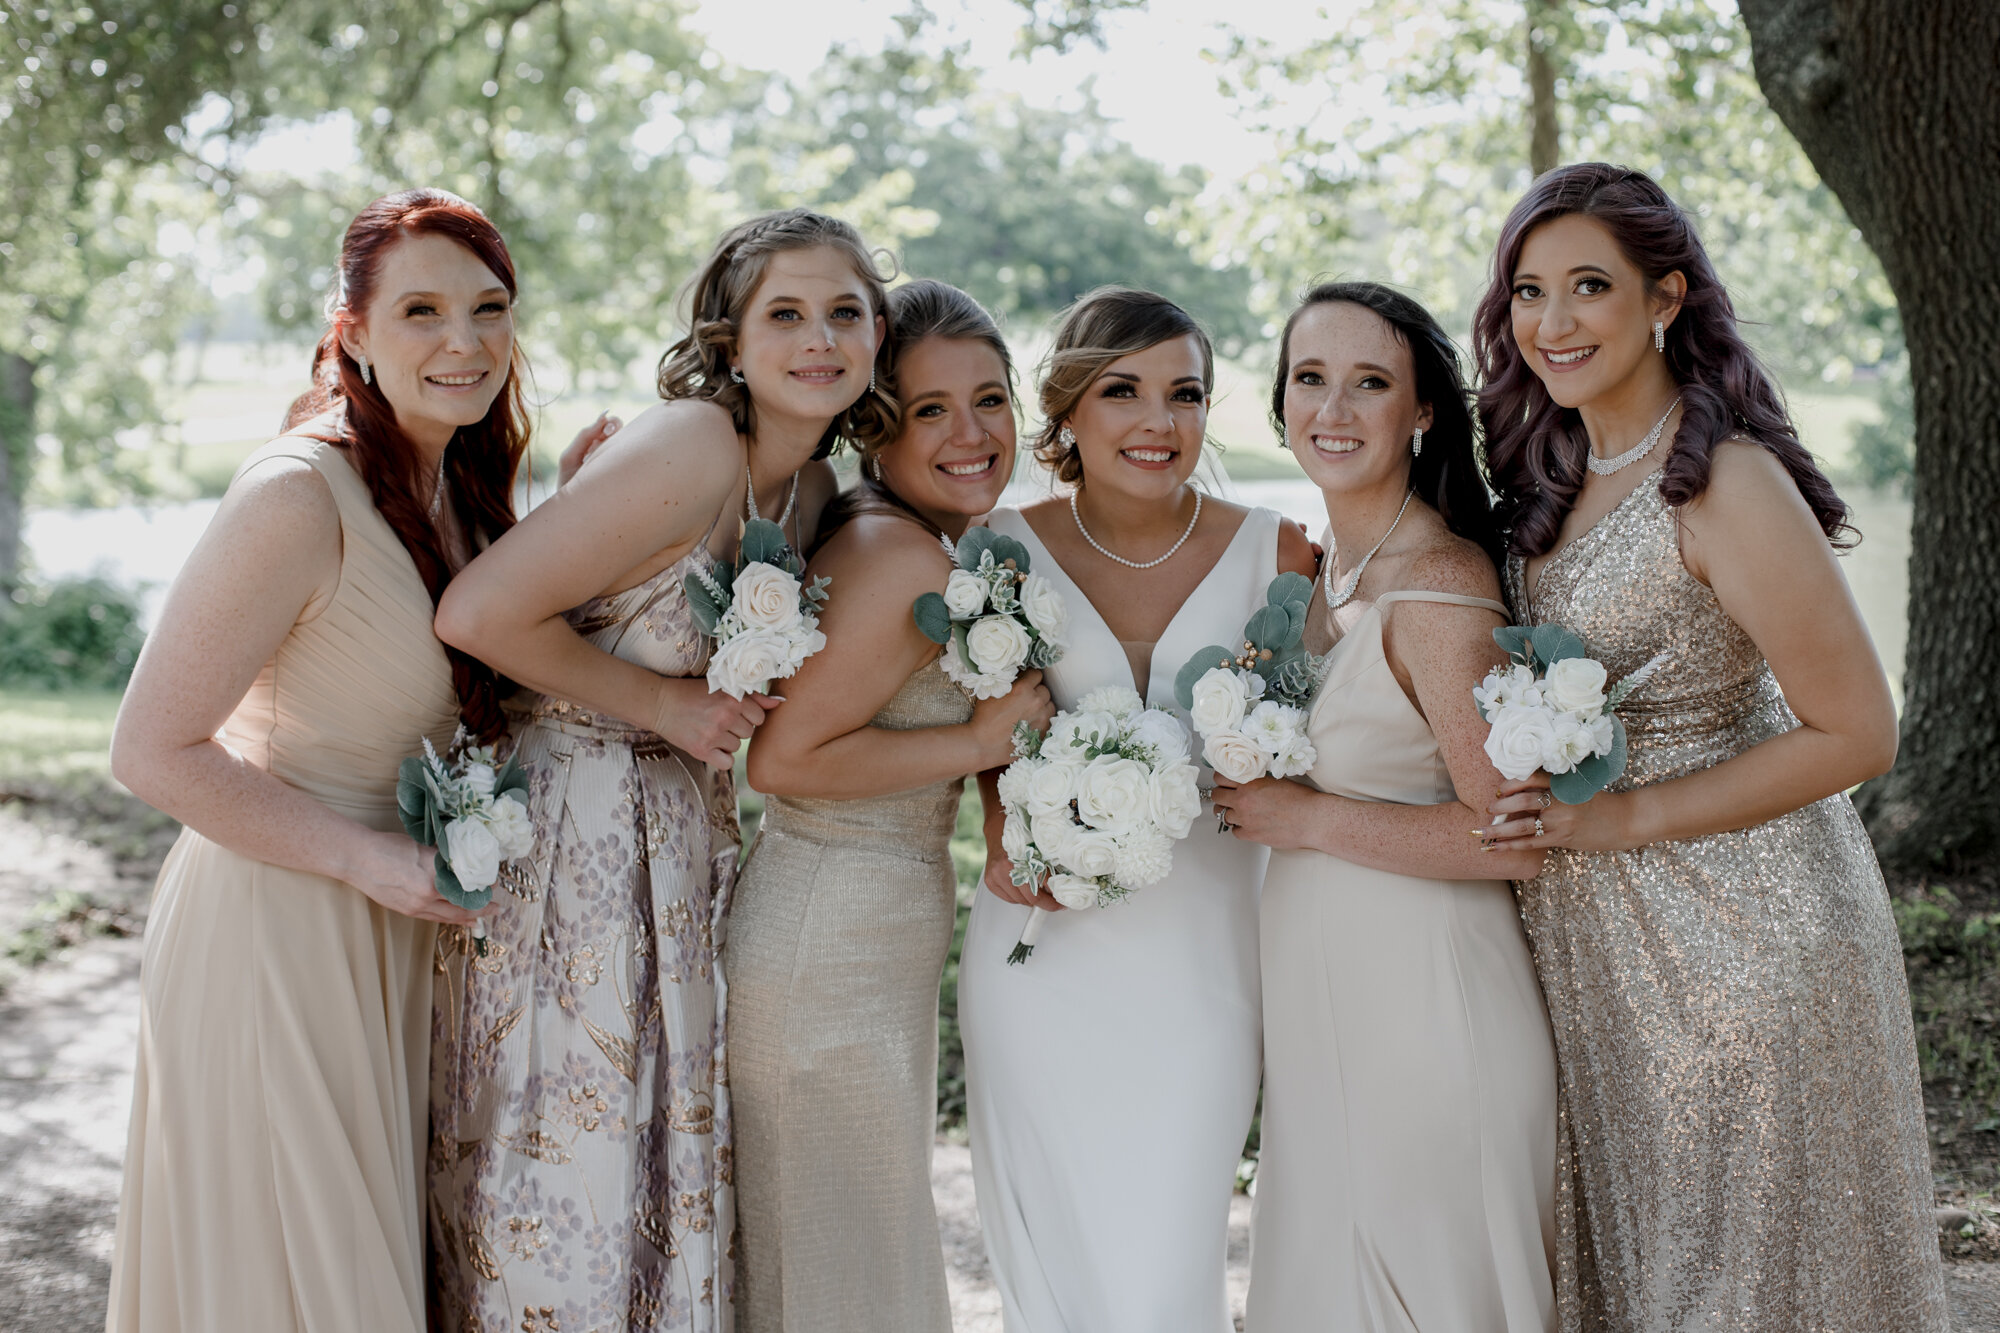 Bride and bridesmaids portraits. Glowing Wedding in Golden Champagne Tones at The Orchard at Caney Creek in Wharton, TX